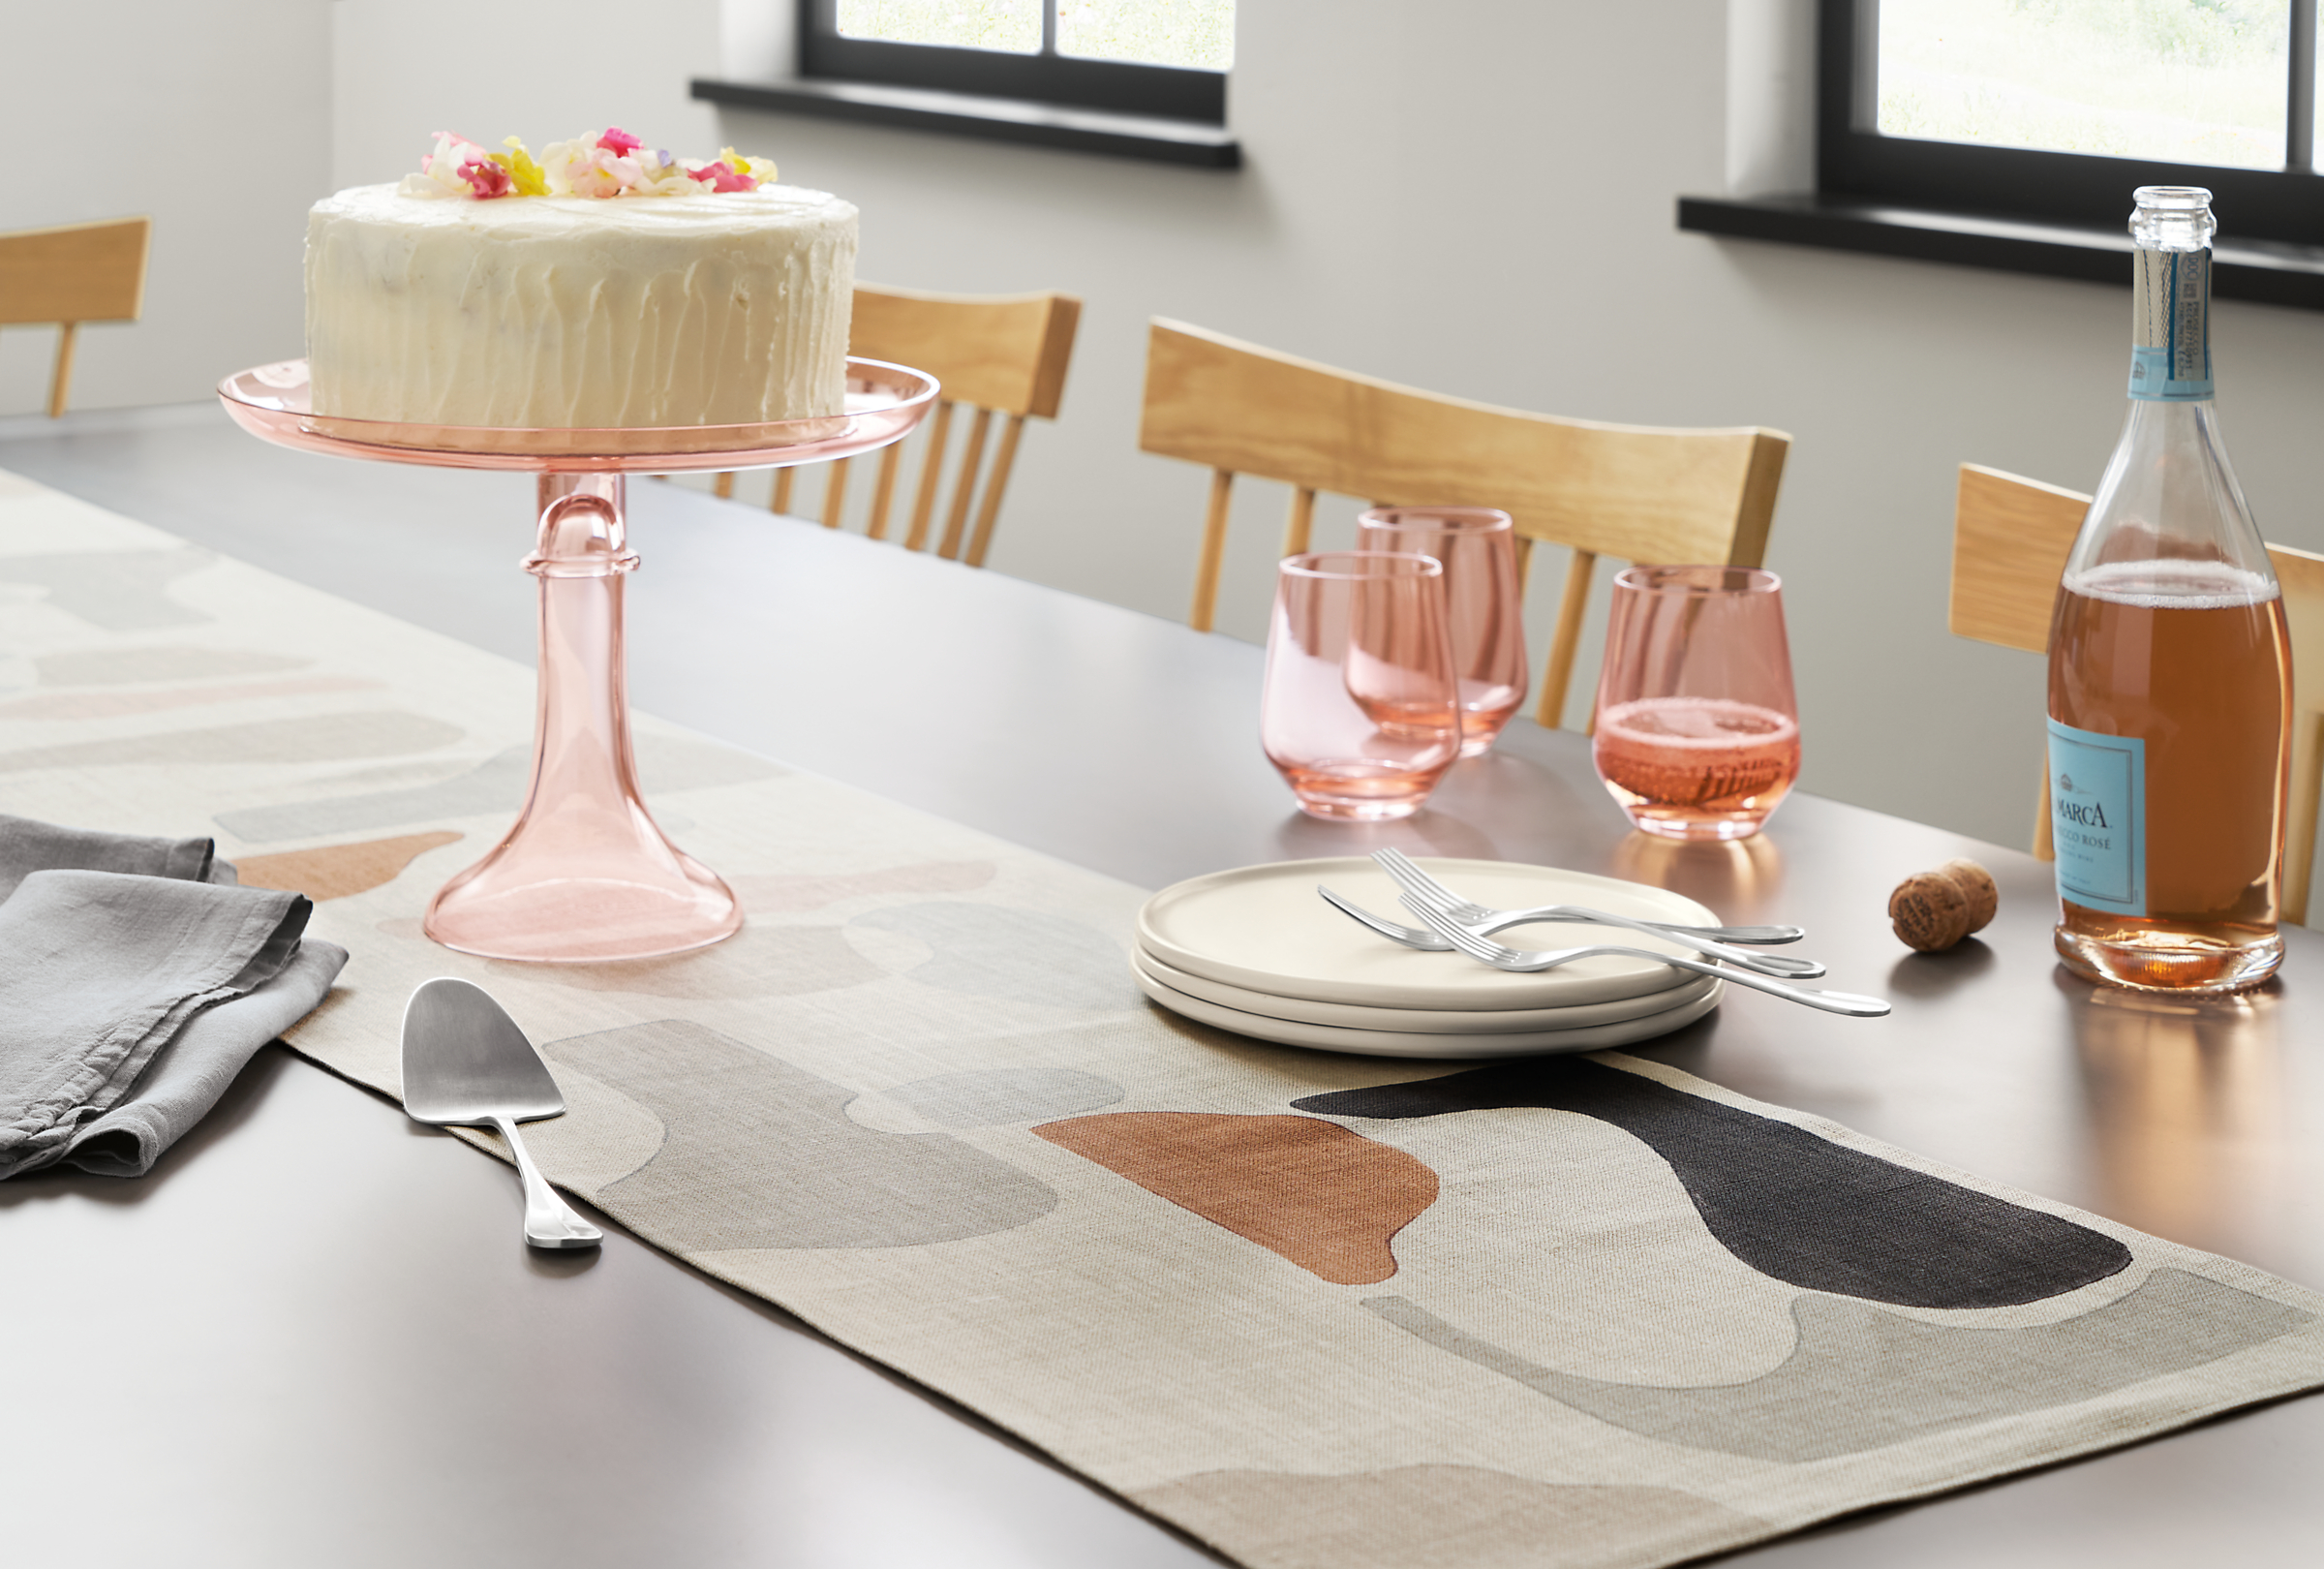 Dining room table with Dune table runner in natural, Estelle glassware and cake stand and Nadia Salad plates.